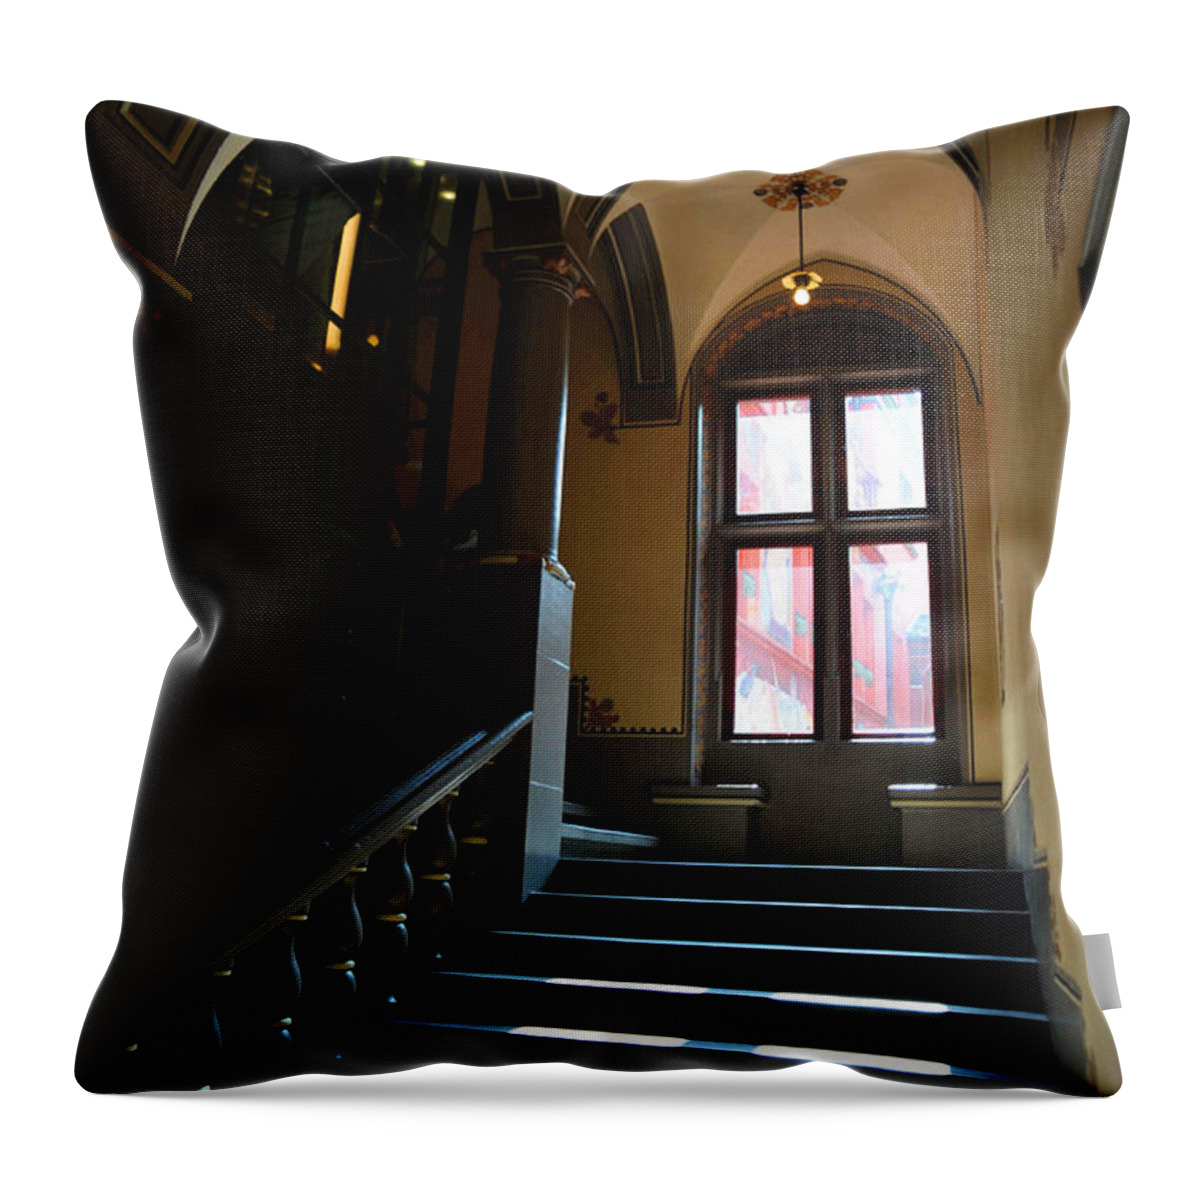 Europe Throw Pillow featuring the photograph Lighted Stairs by Richard Gehlbach